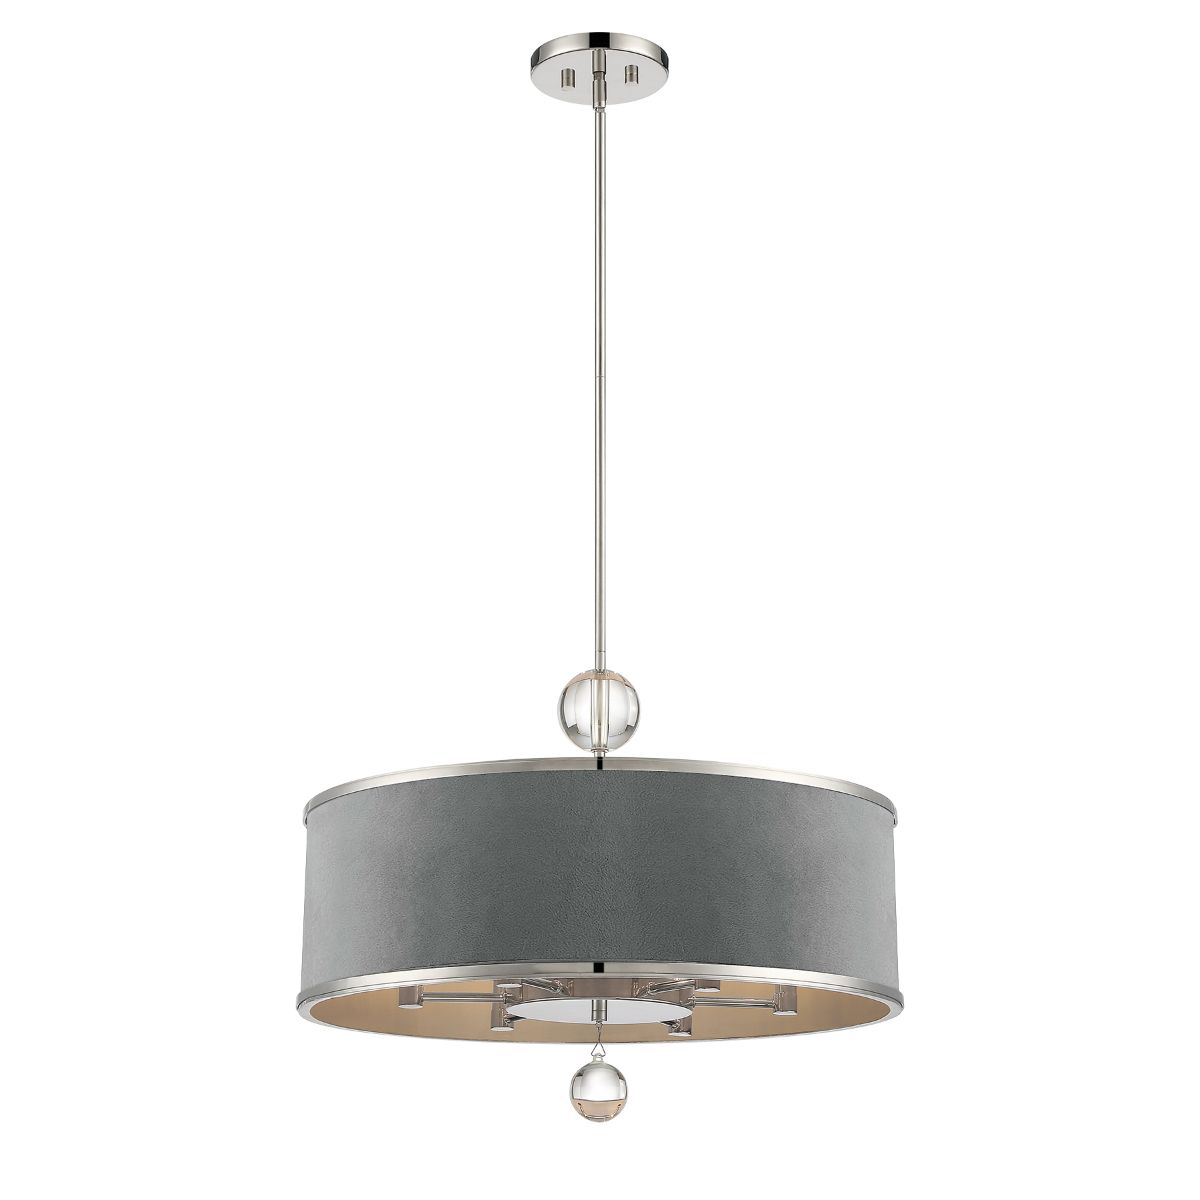 Luxour 24 in. 6 lights Pendant Light Polished Nickel Finish